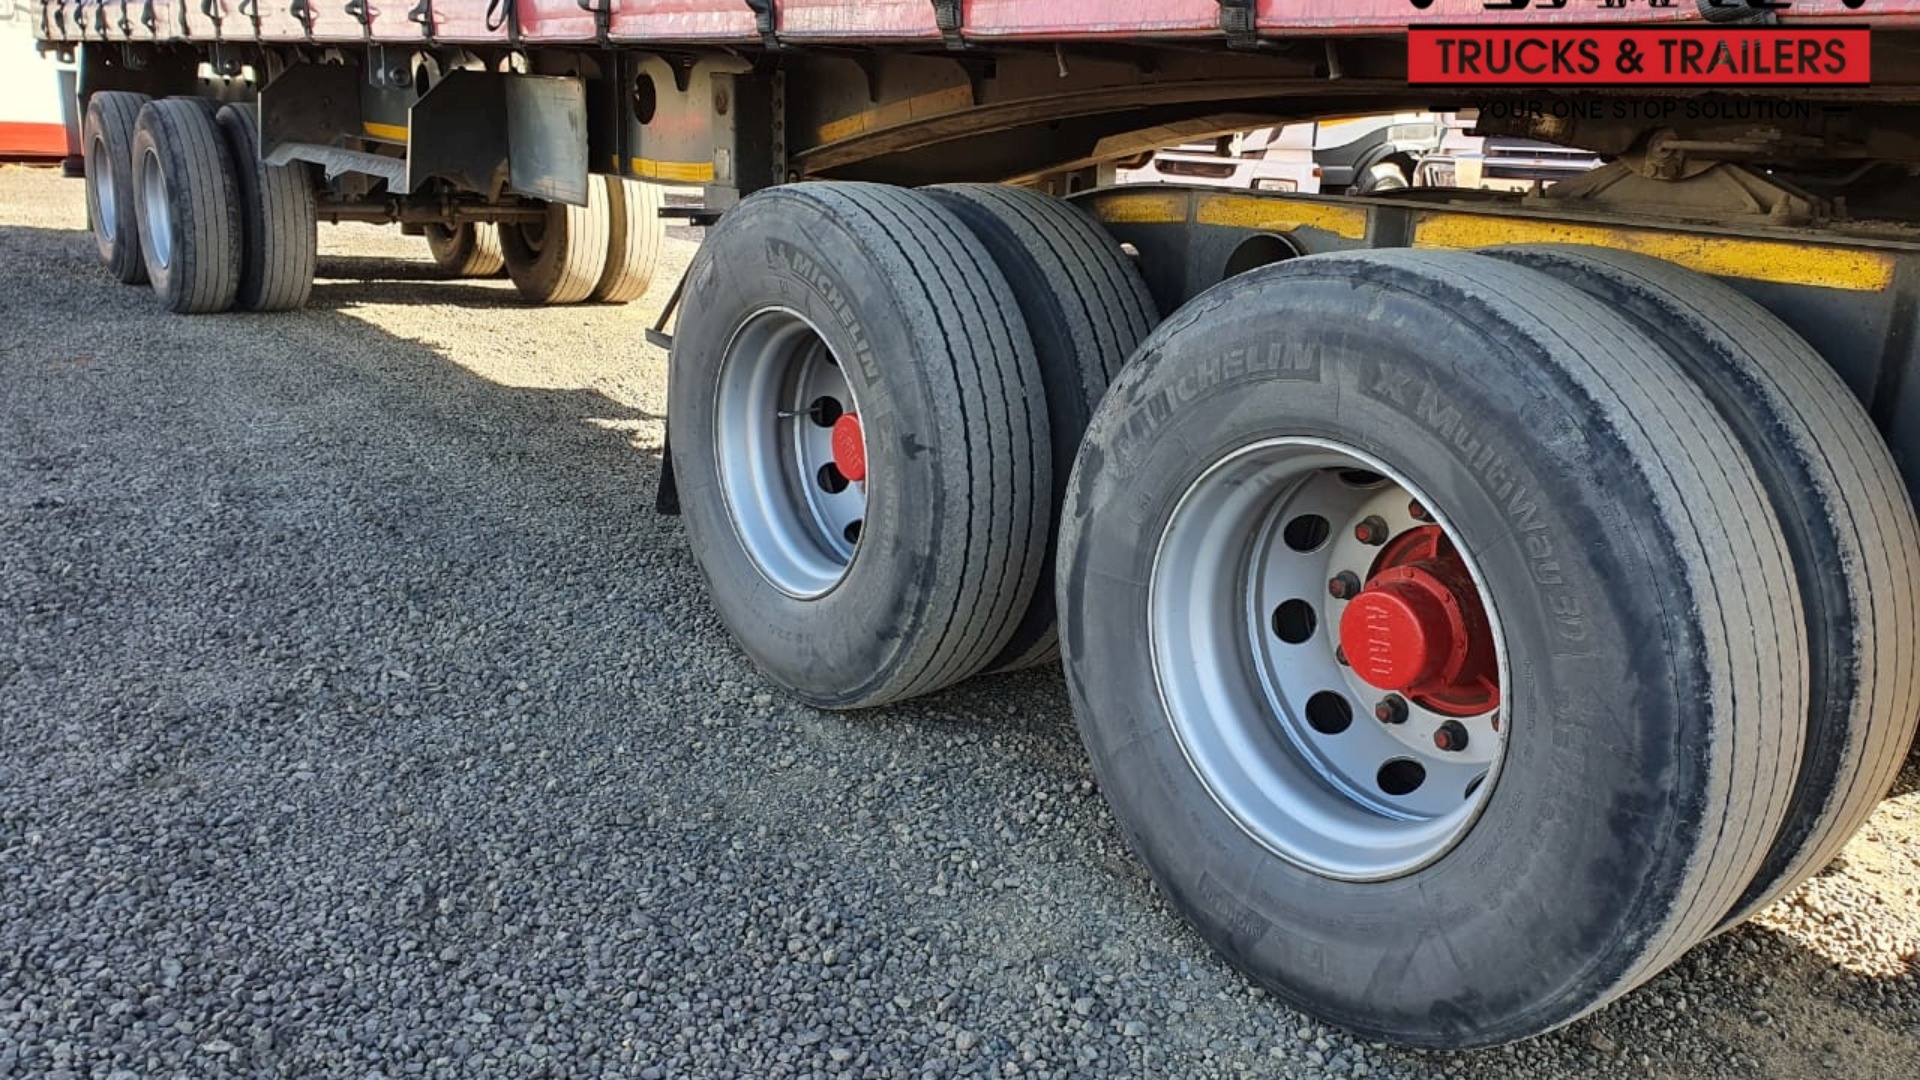 Afrit Trailers Tautliner AFRIT TAUTLINER 2010 for sale by ZA Trucks and Trailers Sales | Truck & Trailer Marketplaces